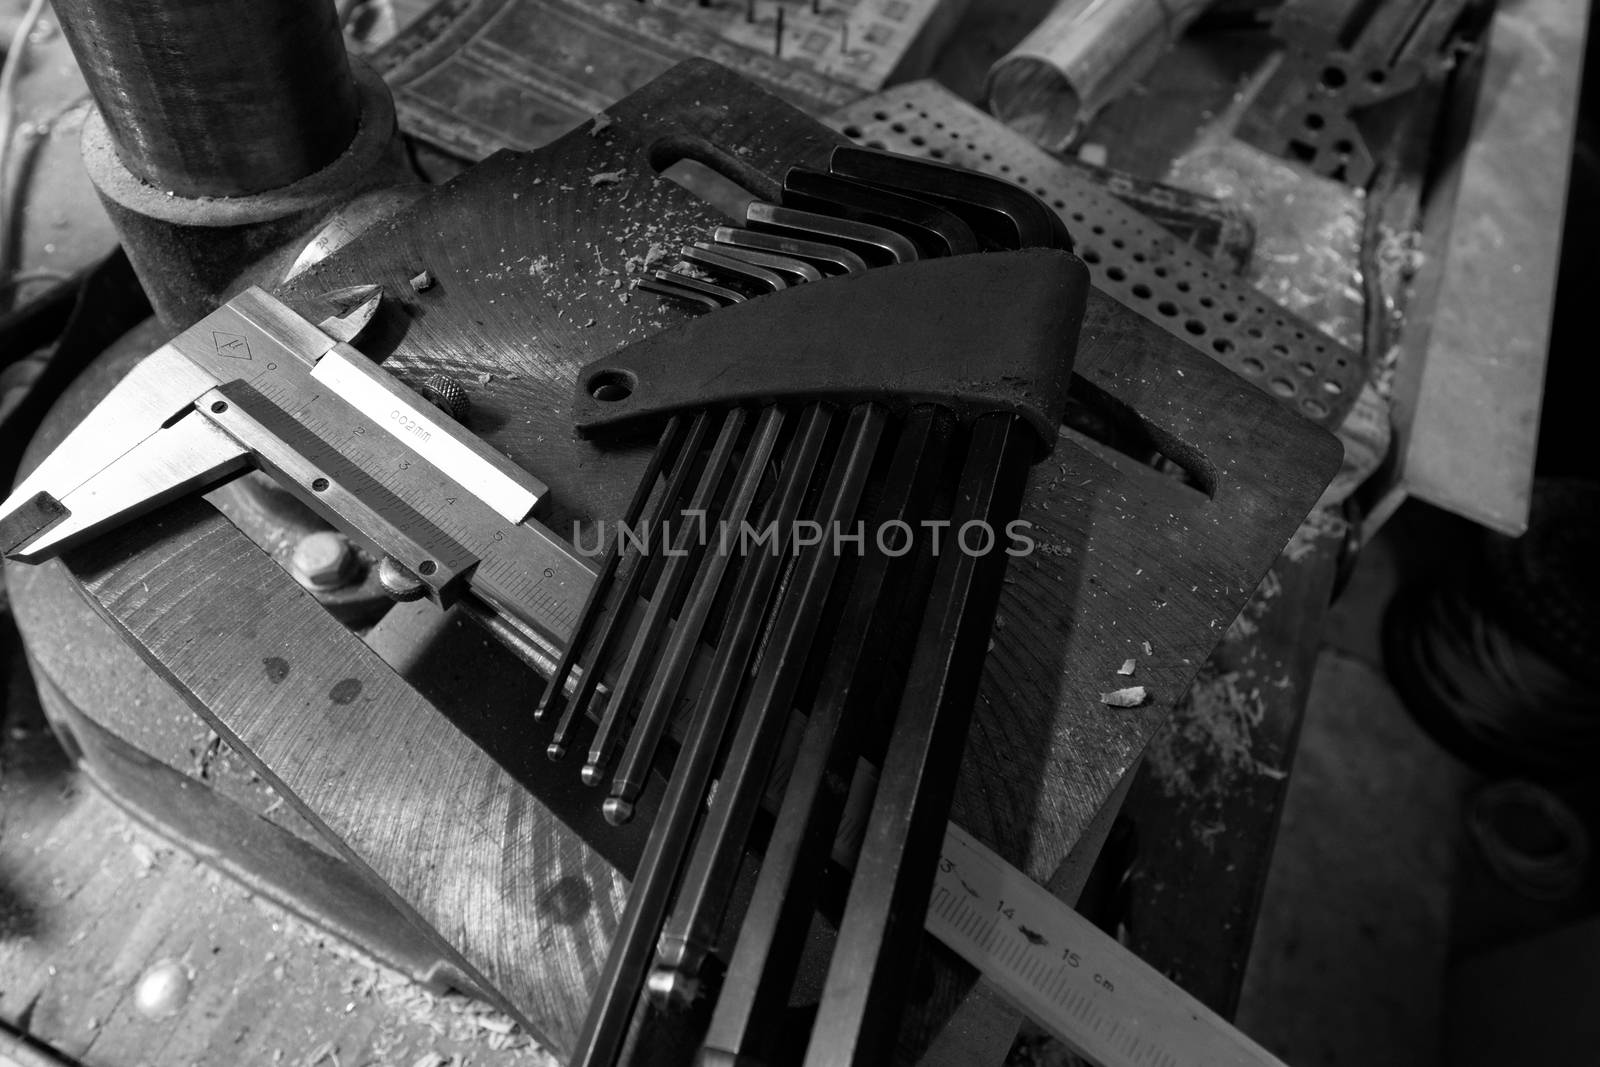 The workshop table tools by Nneirda